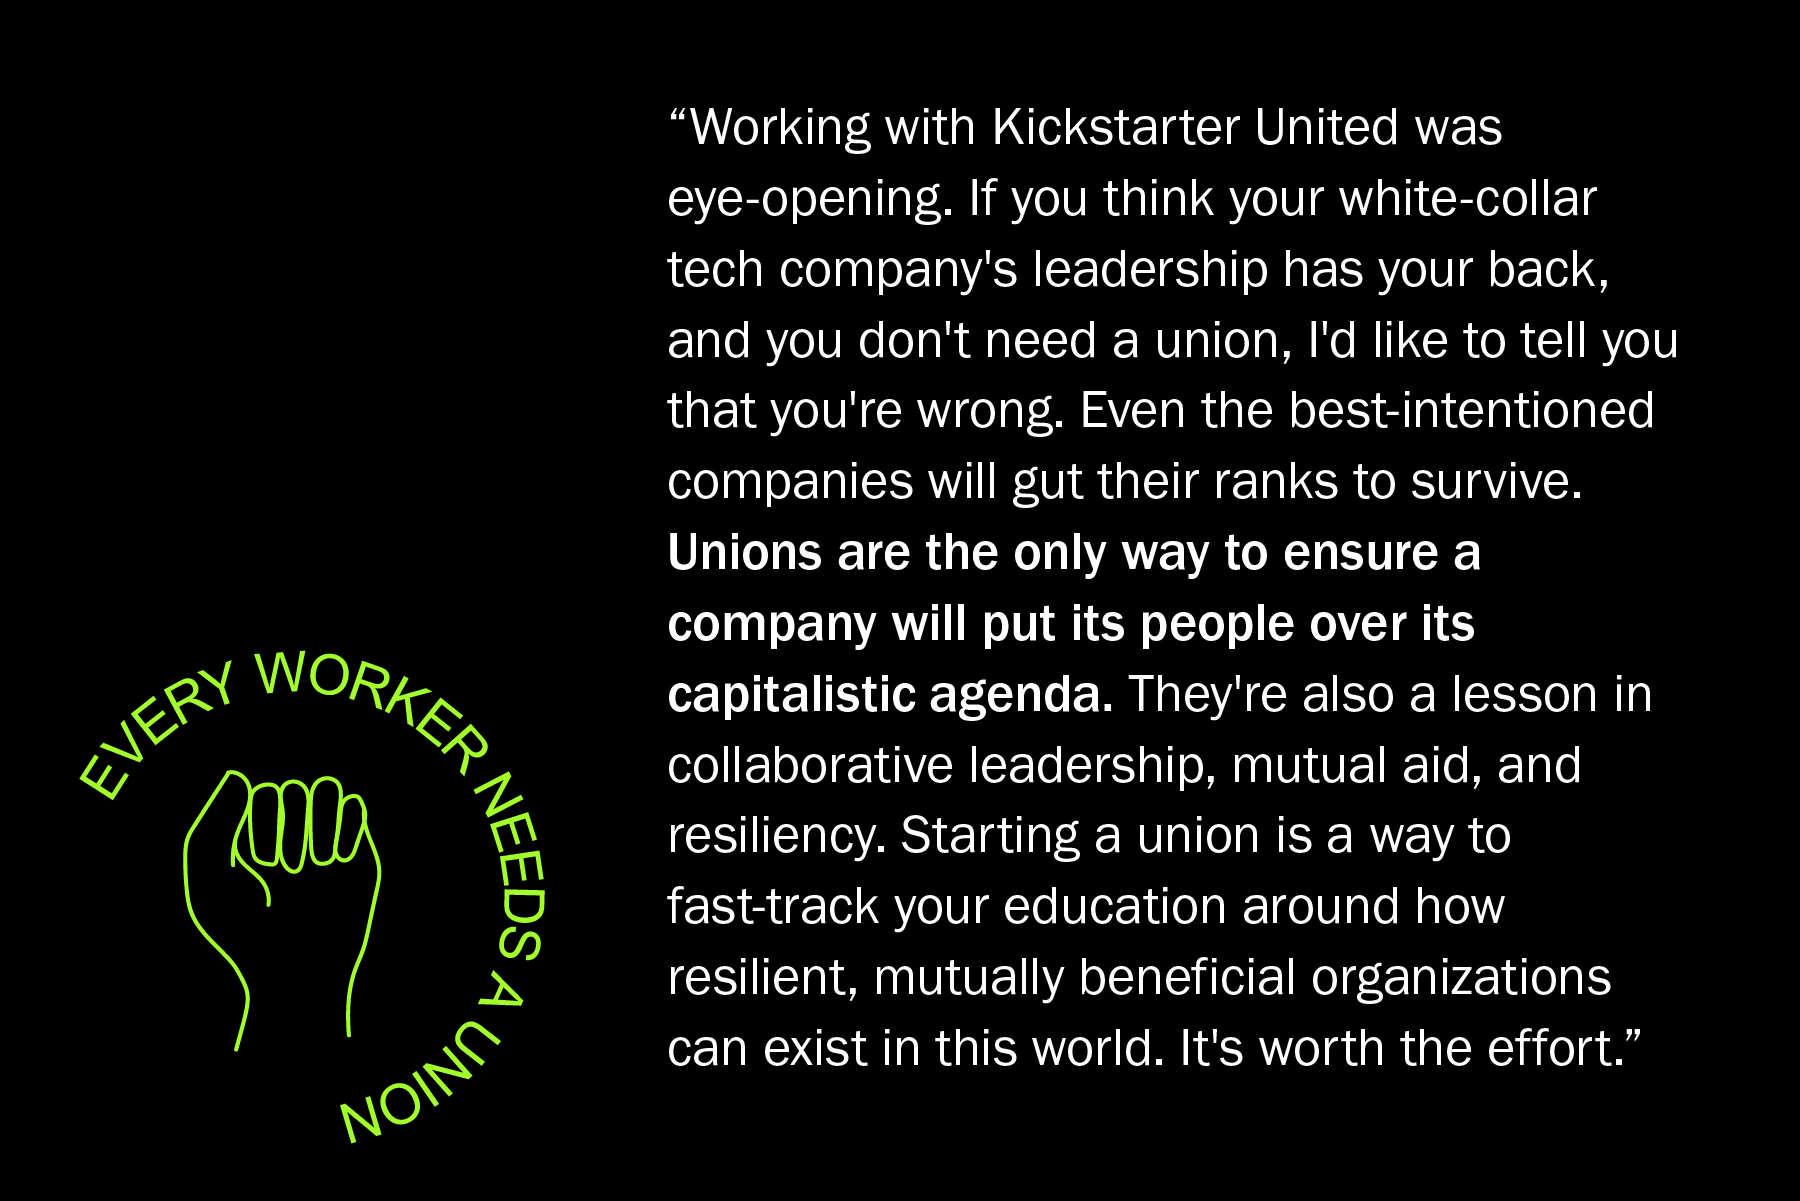 Working with Kickstarter United was eye-opening. If you think your white-collar tech company's leadership has your back, and you don't need a union, I'd like to tell you that you're wrong. Even the best-intentioned companies will gut their ranks to survive. Unions are the only way to ensure a company will put its people over its capitalistic agenda. They're also a lesson in collaborative leadership, mutual aid, and resiliency. Starting a union is a way to fast-track your education around how resilient, mutually beneficial organizations can exists in this world. It's worth the effort.